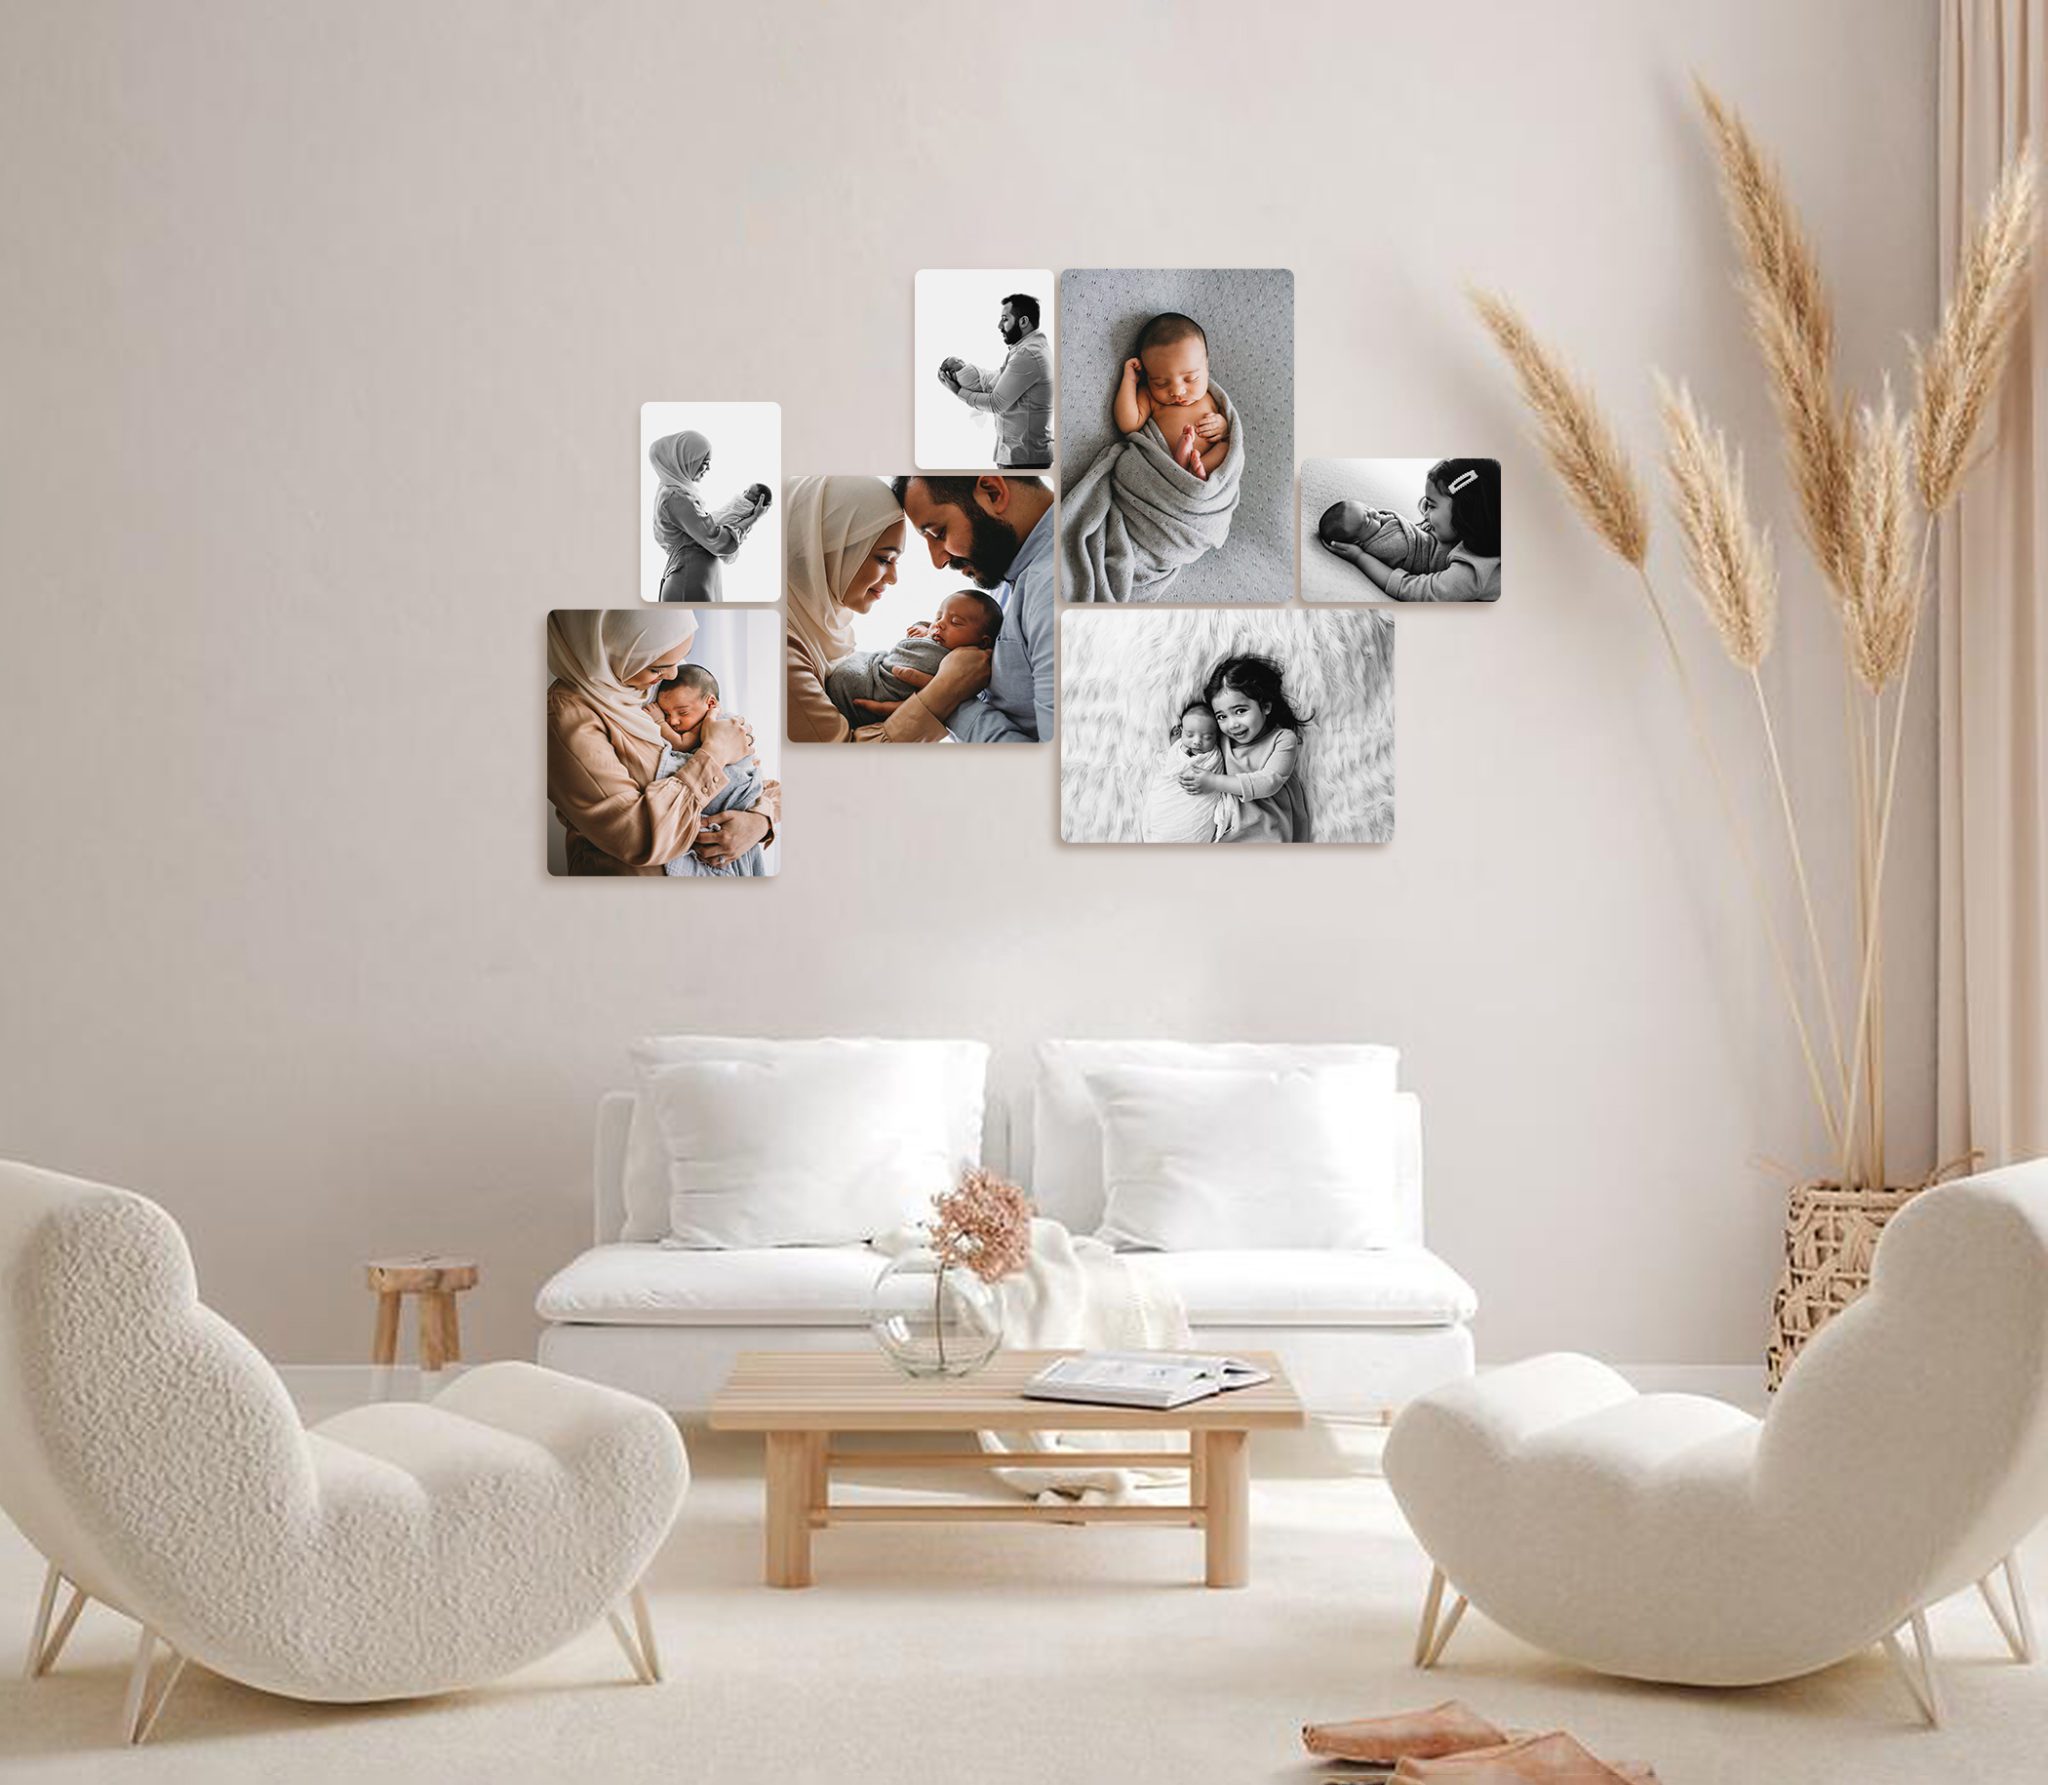 Wall art displaying newborn photography images